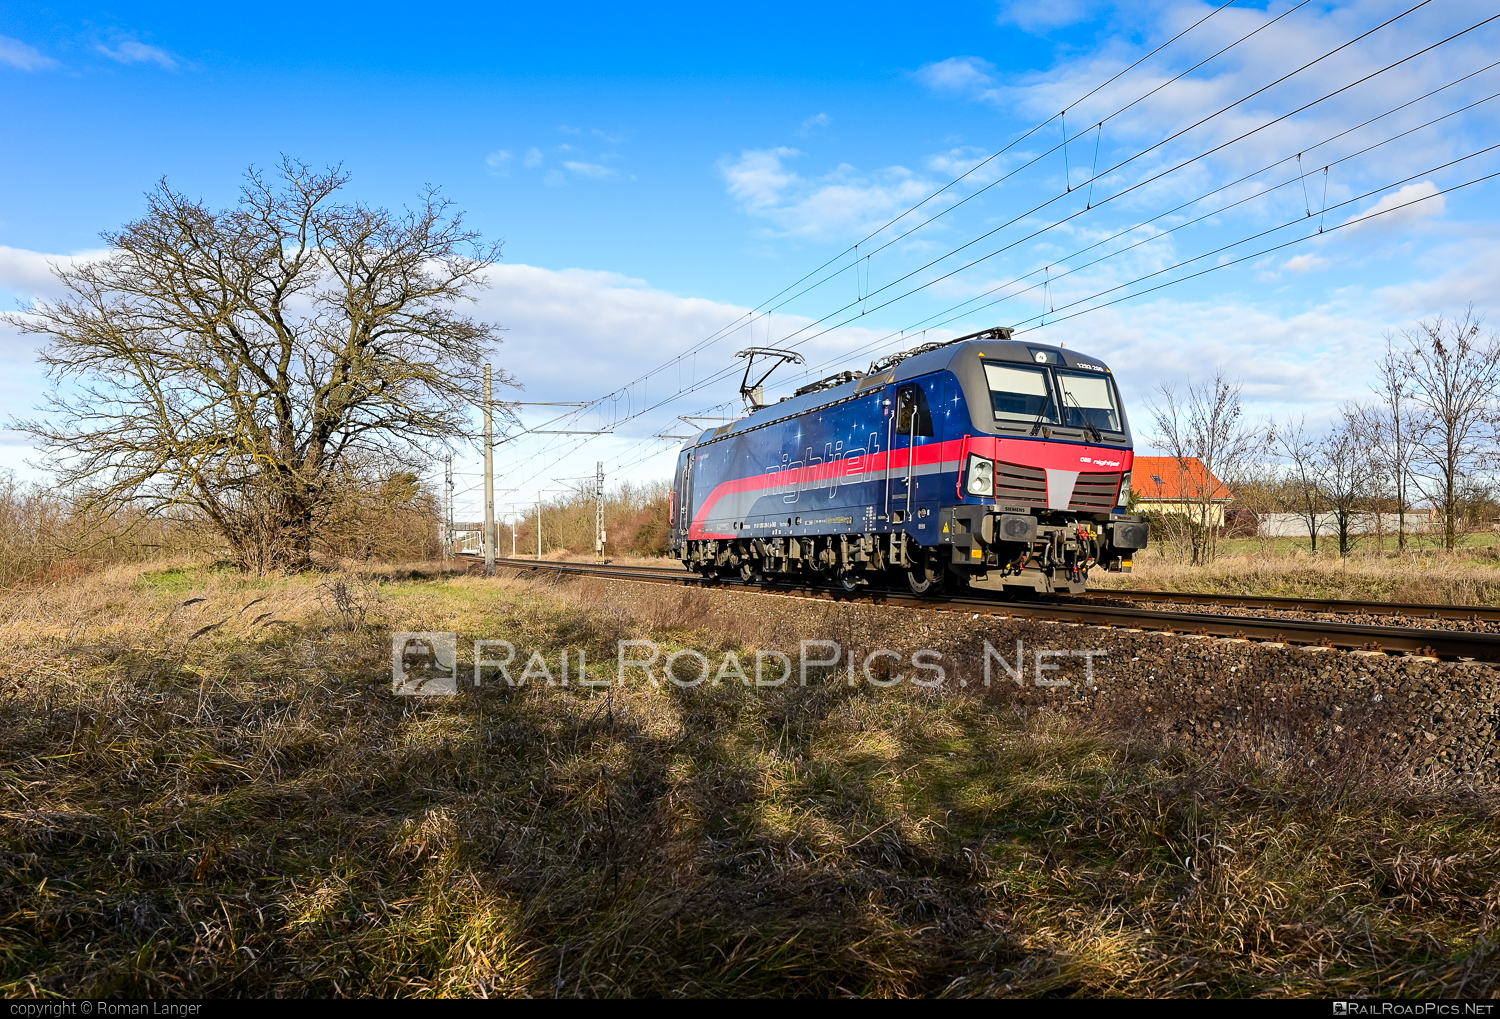 Siemens Vectron MS - 1293 200 operated by Rail Cargo Carrier – Slovakia s.r.o. #nightjet #obb #osterreichischebundesbahnen #siemens #siemensVectron #siemensVectronMS #vectron #vectronMS #wssk